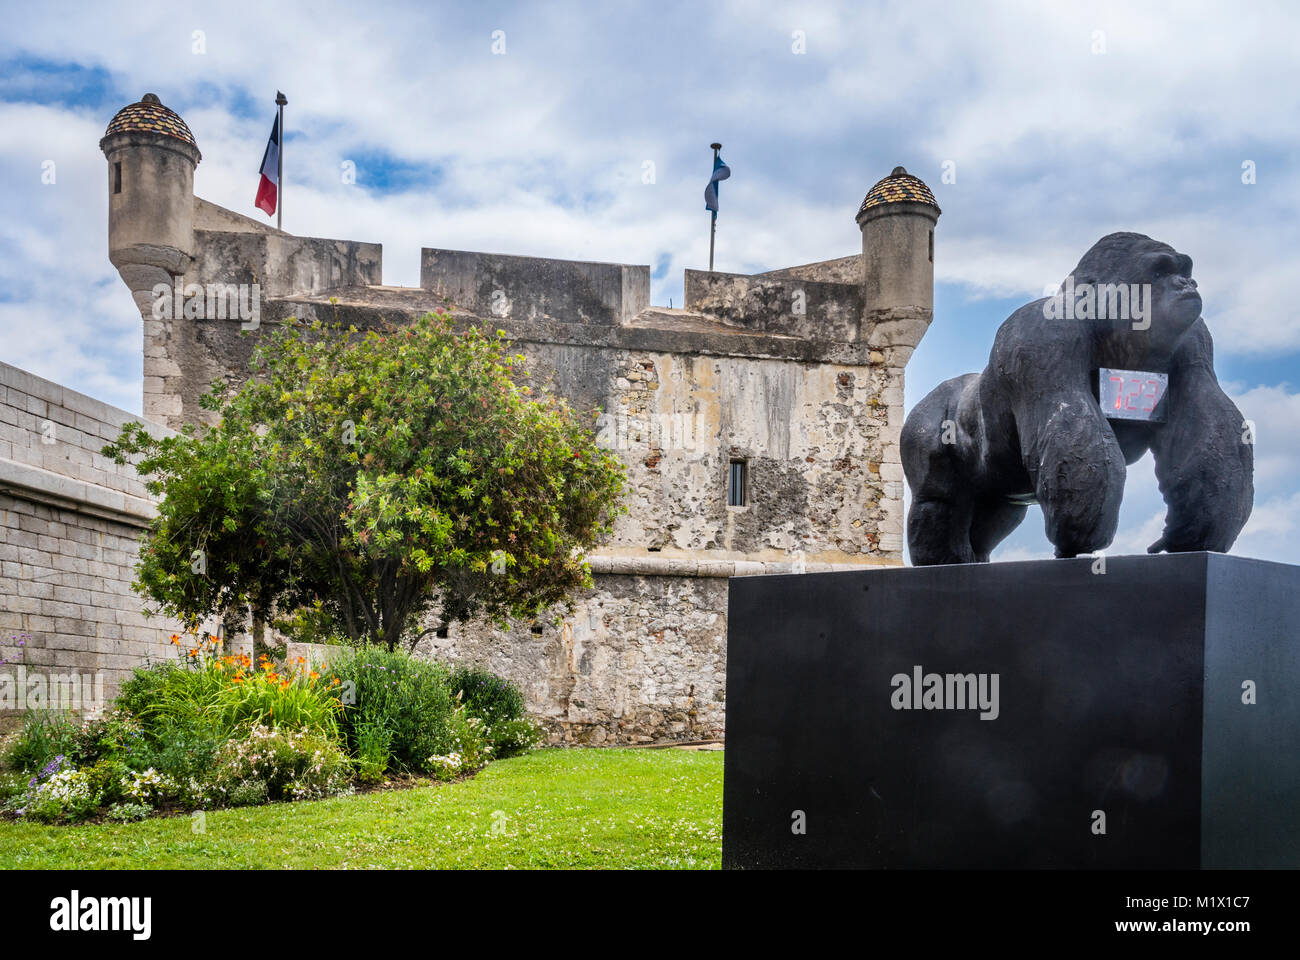 France, Alpes-Maritime department, Côte d'Azur, Menton, sculpture of the Gorilla Harambe at the Bastion Museum Stock Photo